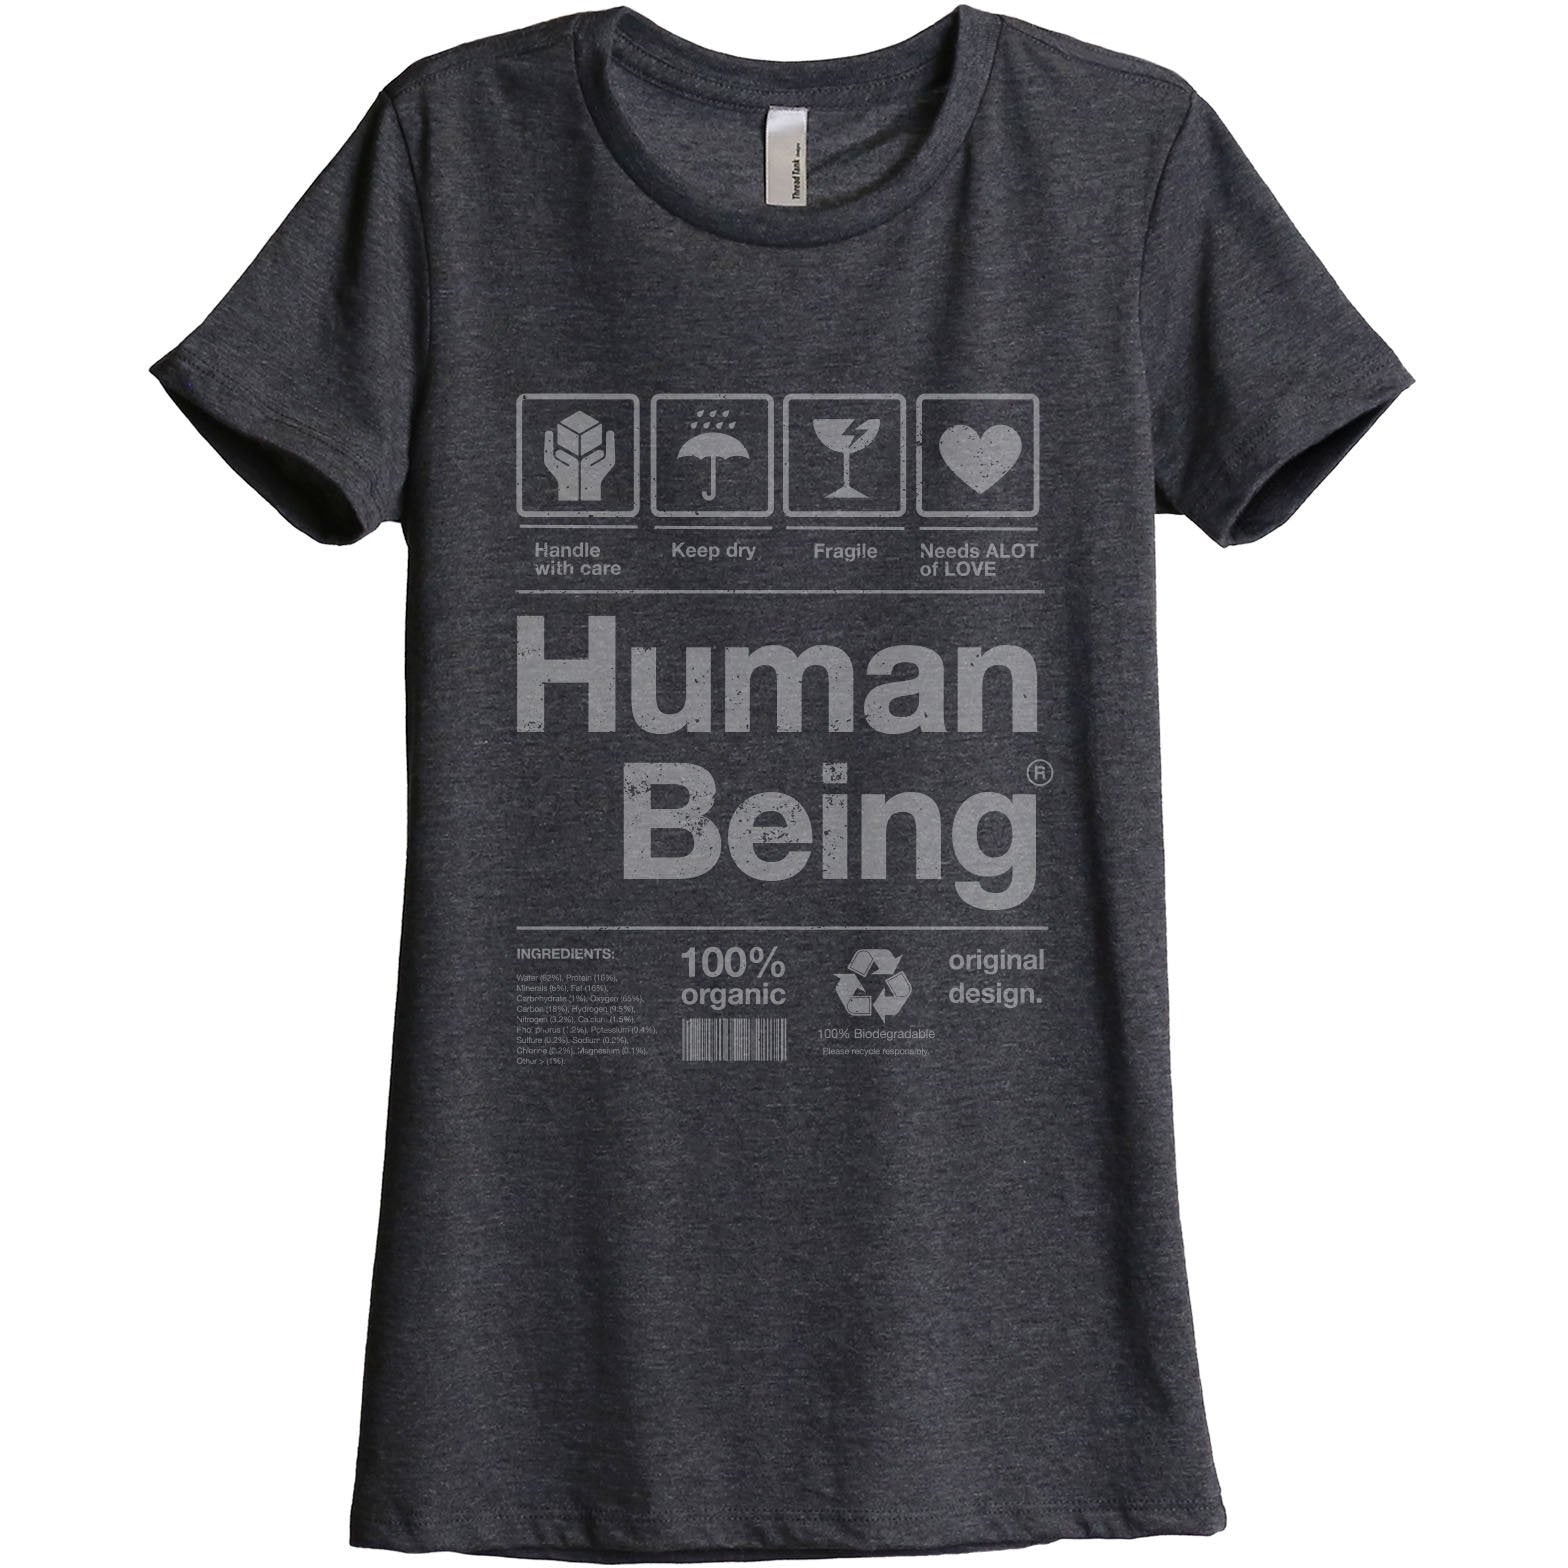 Human Being Women's Relaxed Crewneck T-Shirt Top Tee Charcoal Grey
